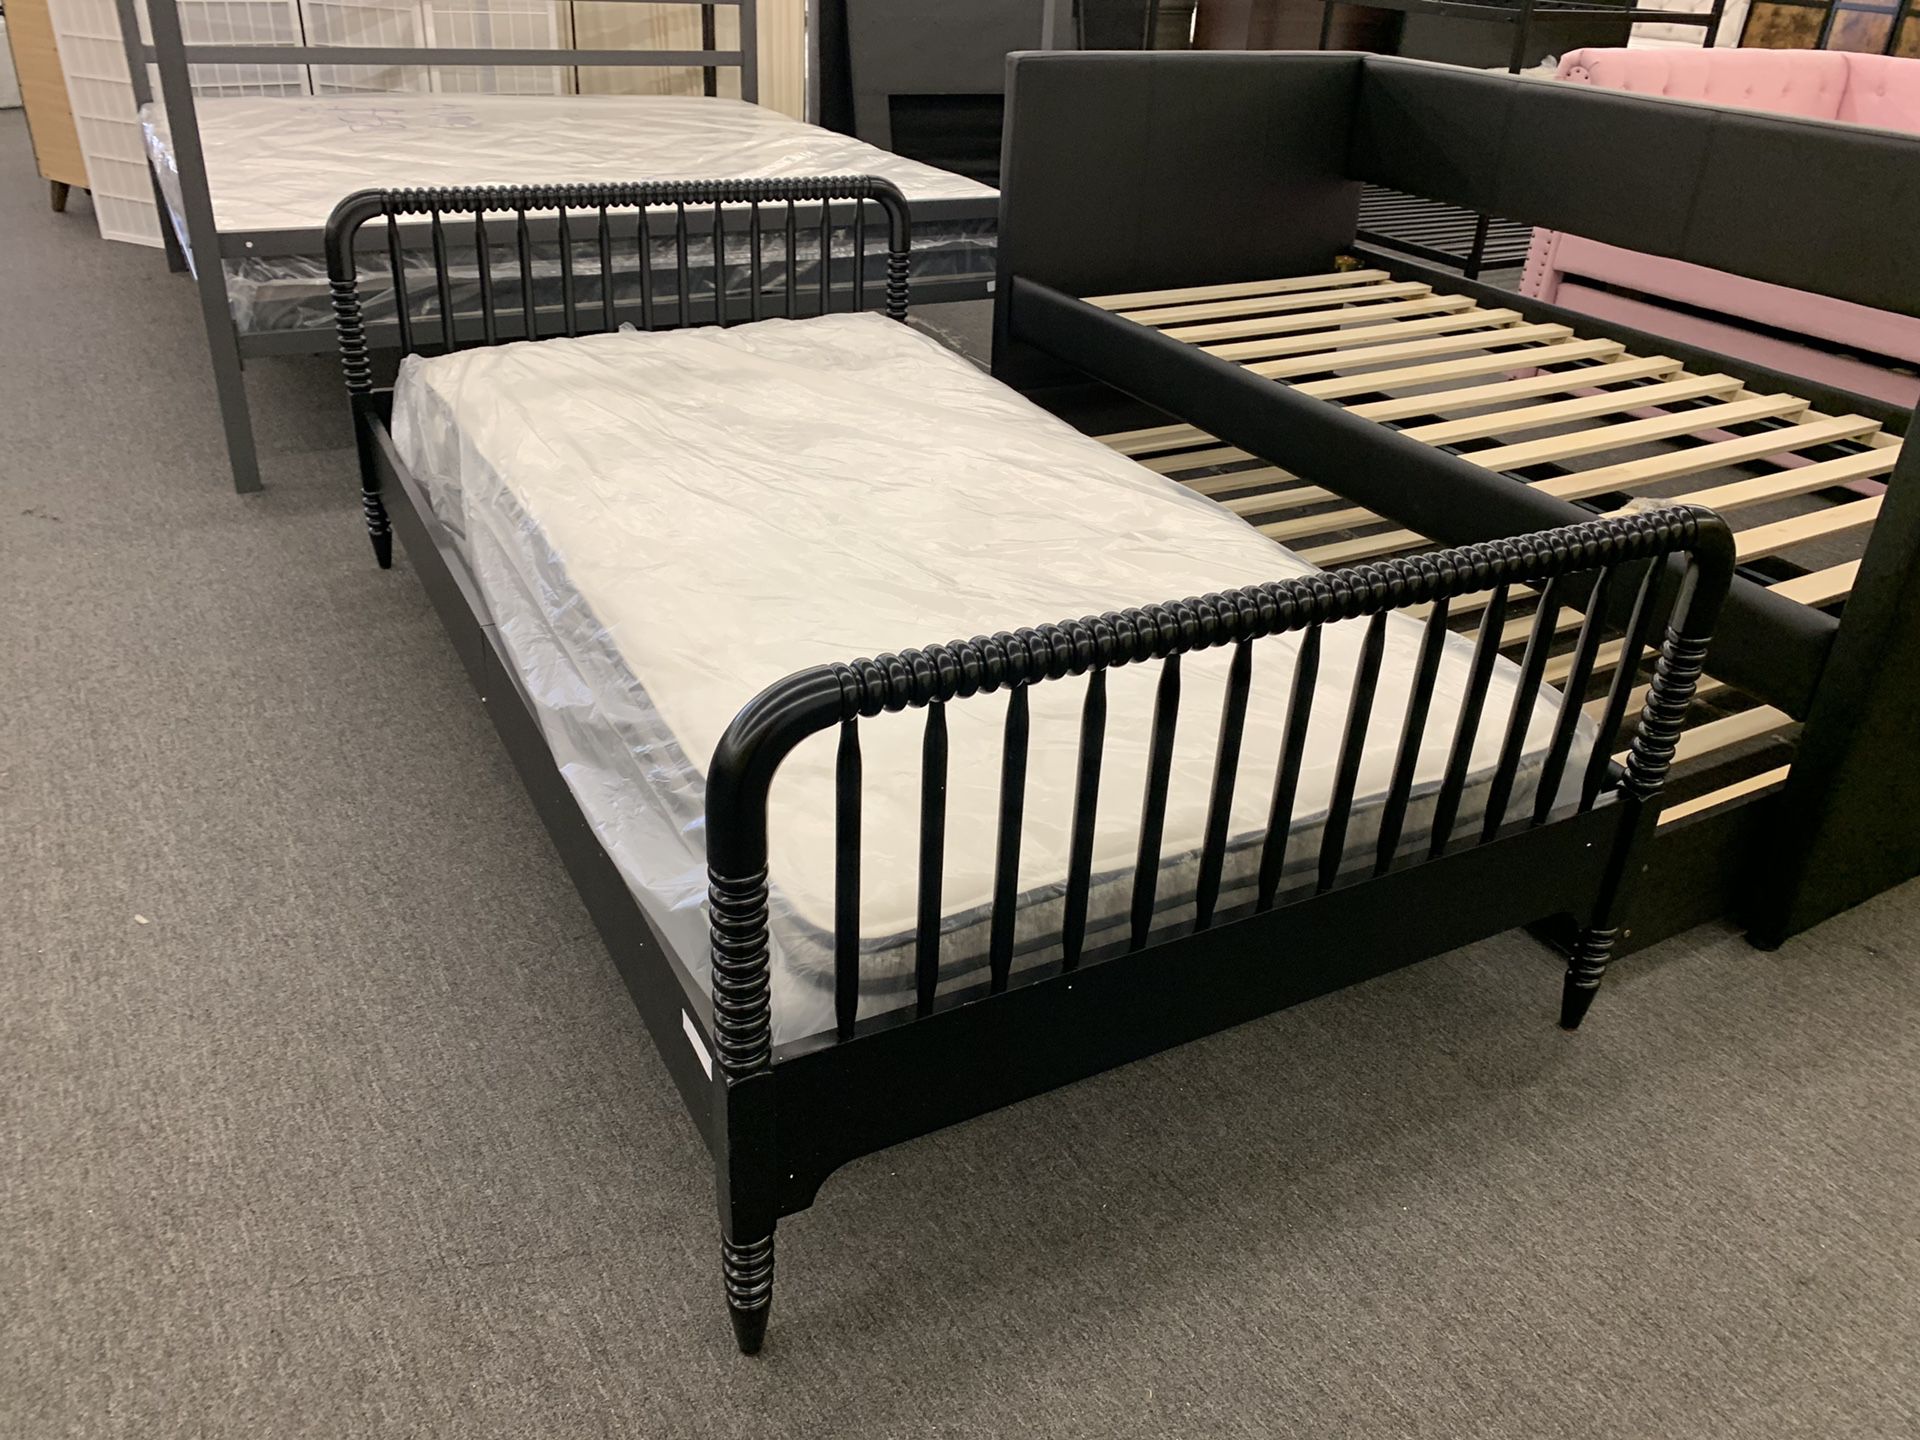 Little Seeds Rowan Valley Linden Twin-Size Bed Brand Nameby Little Seeds Bed Frame $125 With *ttress $200 Jm